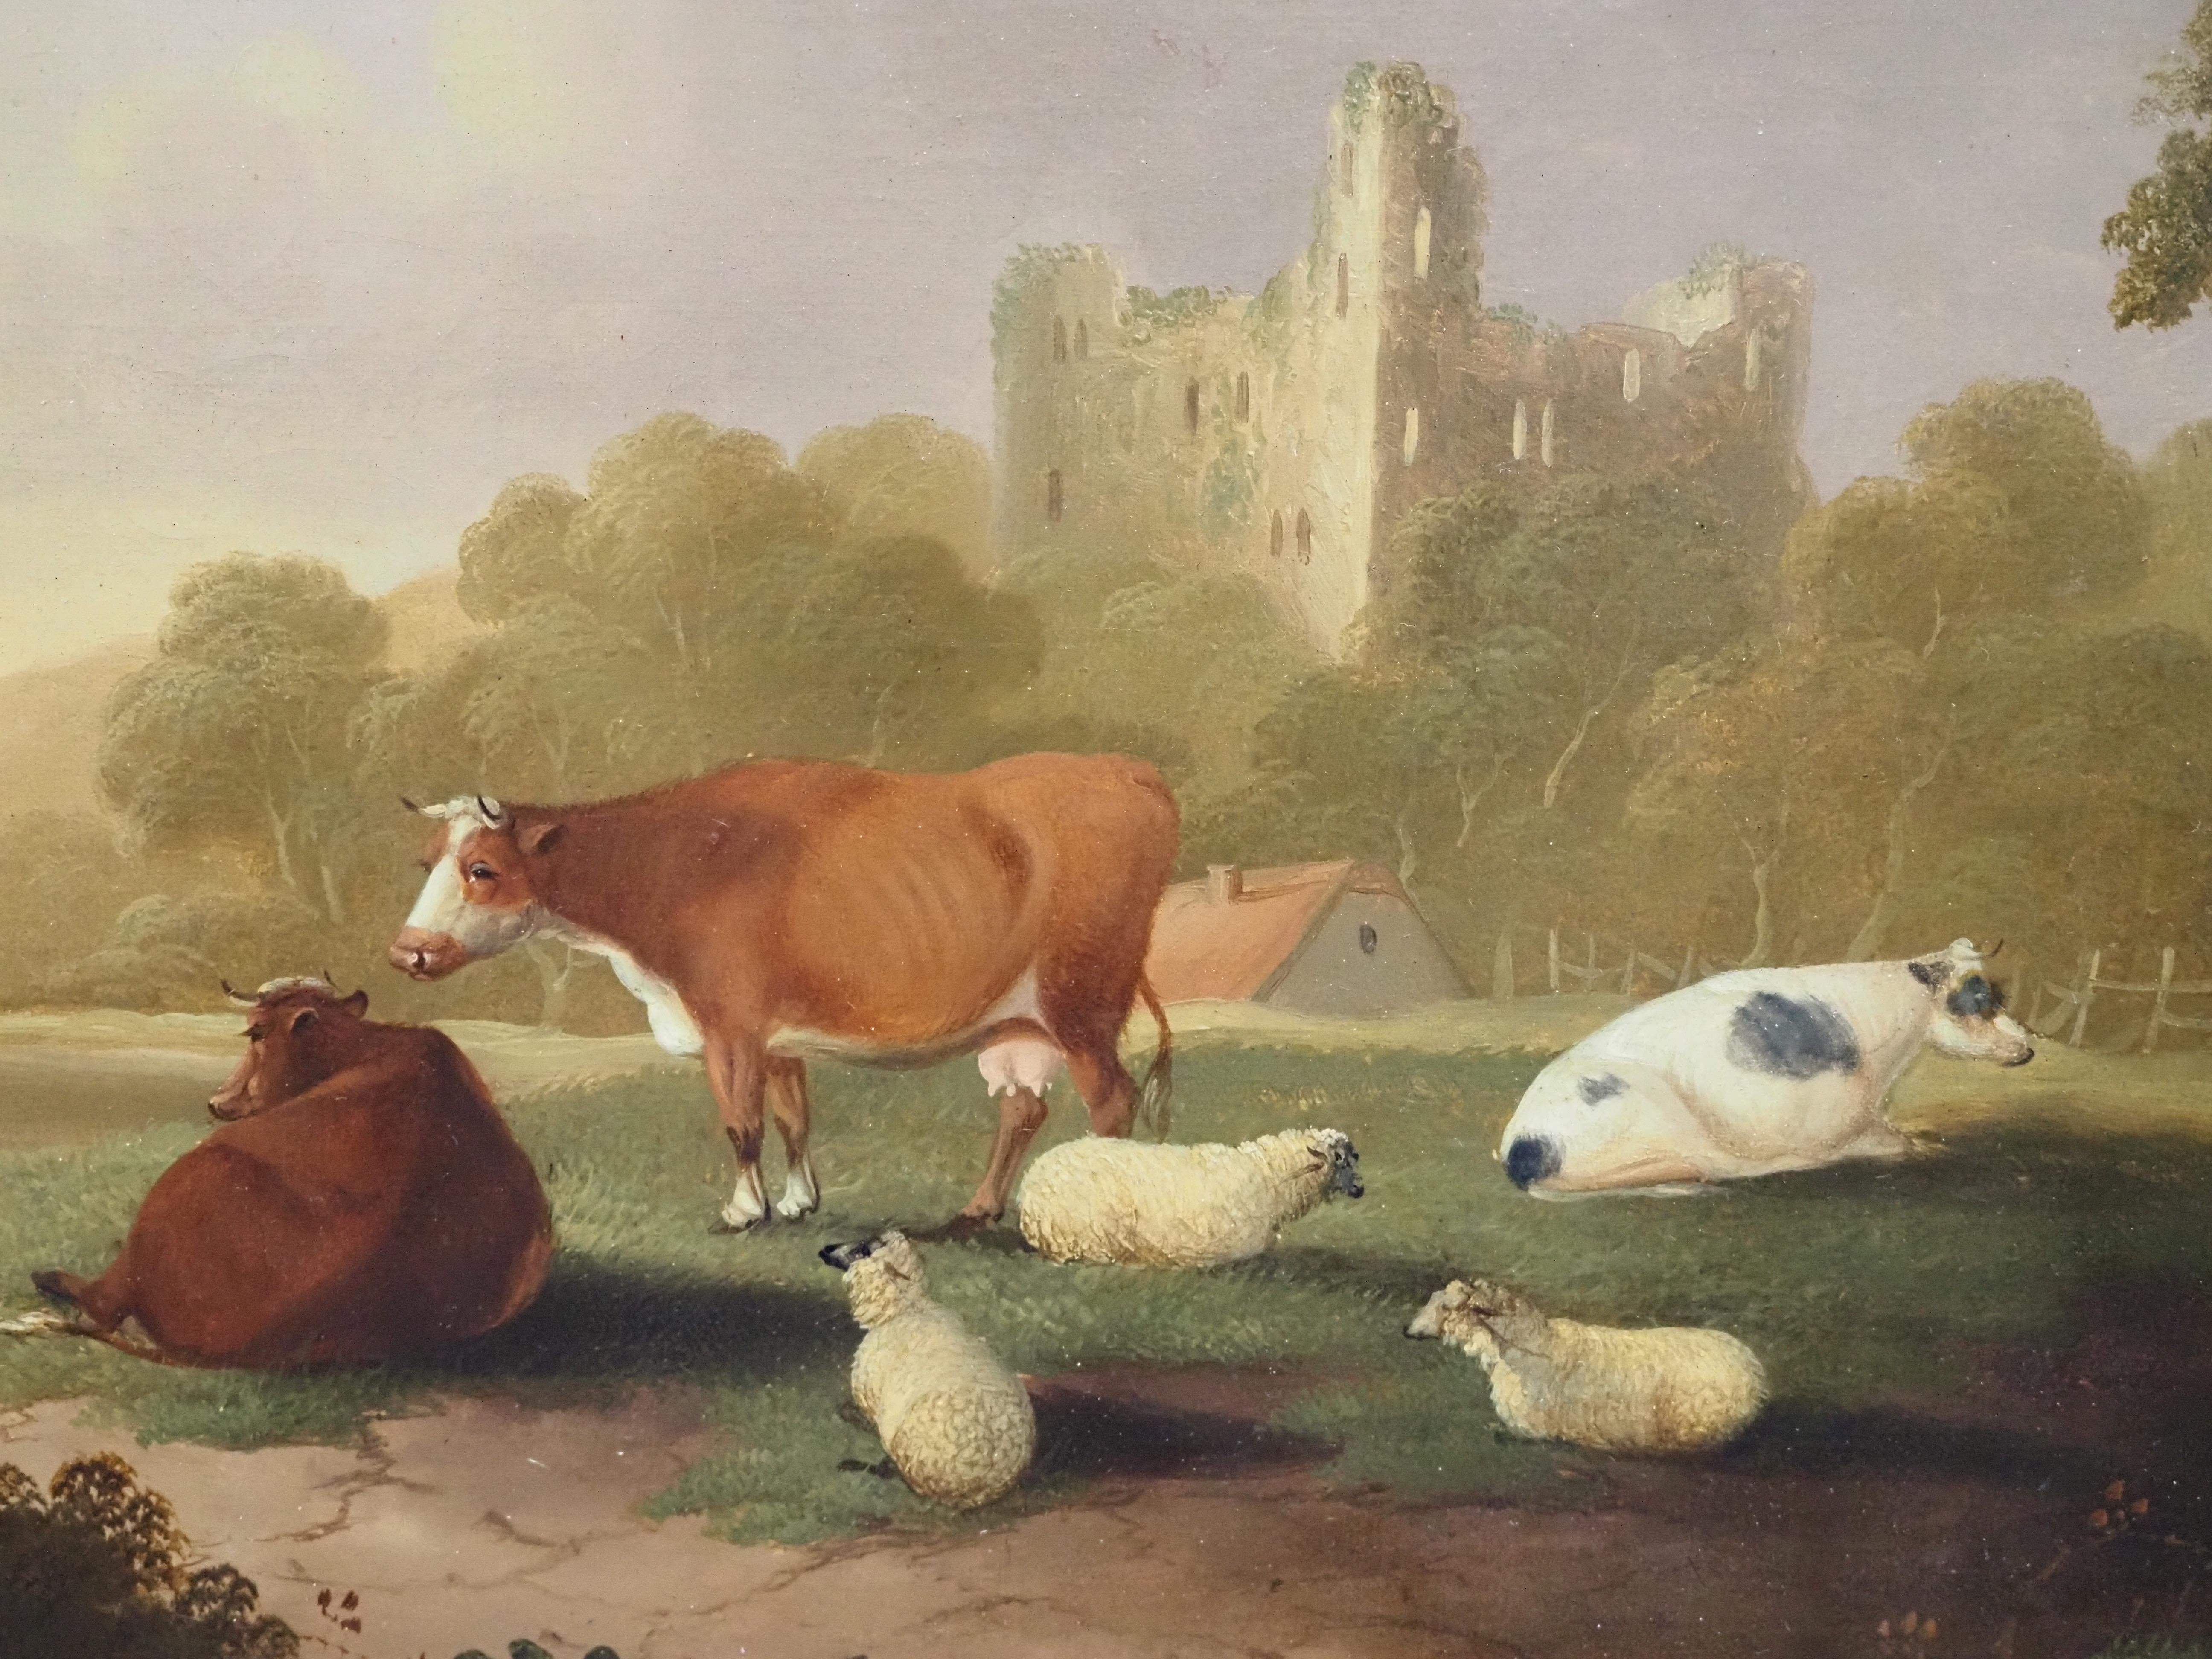 Charles Towne (1763-1840)
Cattle and sheep on the riverbank, a castle beyond
Cattle and sheep on the riverbank, a windmill beyond
Both signed 'C. Towne' lower right
A Pair, oil on canvas
each 26 x 30 in

Provenance
Private Collection,